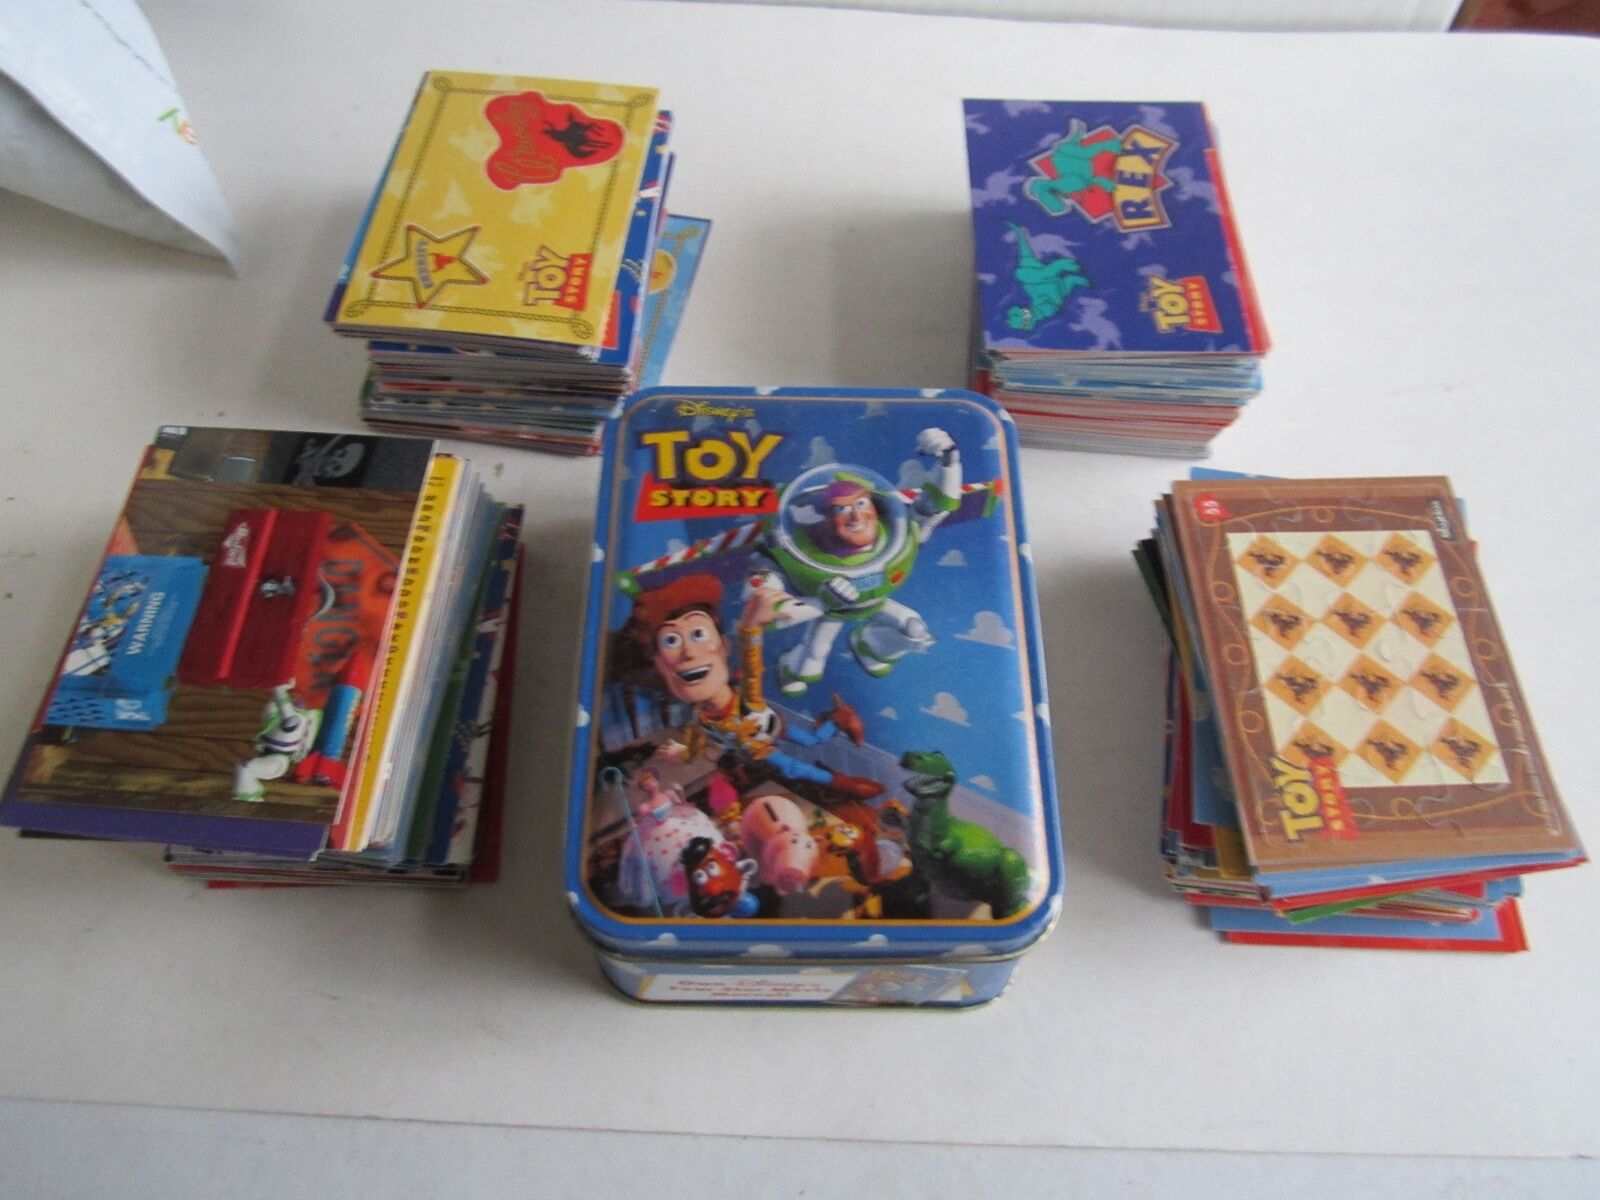 TOY STORY TRADING CARDS - VERY LARGE COLLECTION - UNSEARCHED - TUB AMA